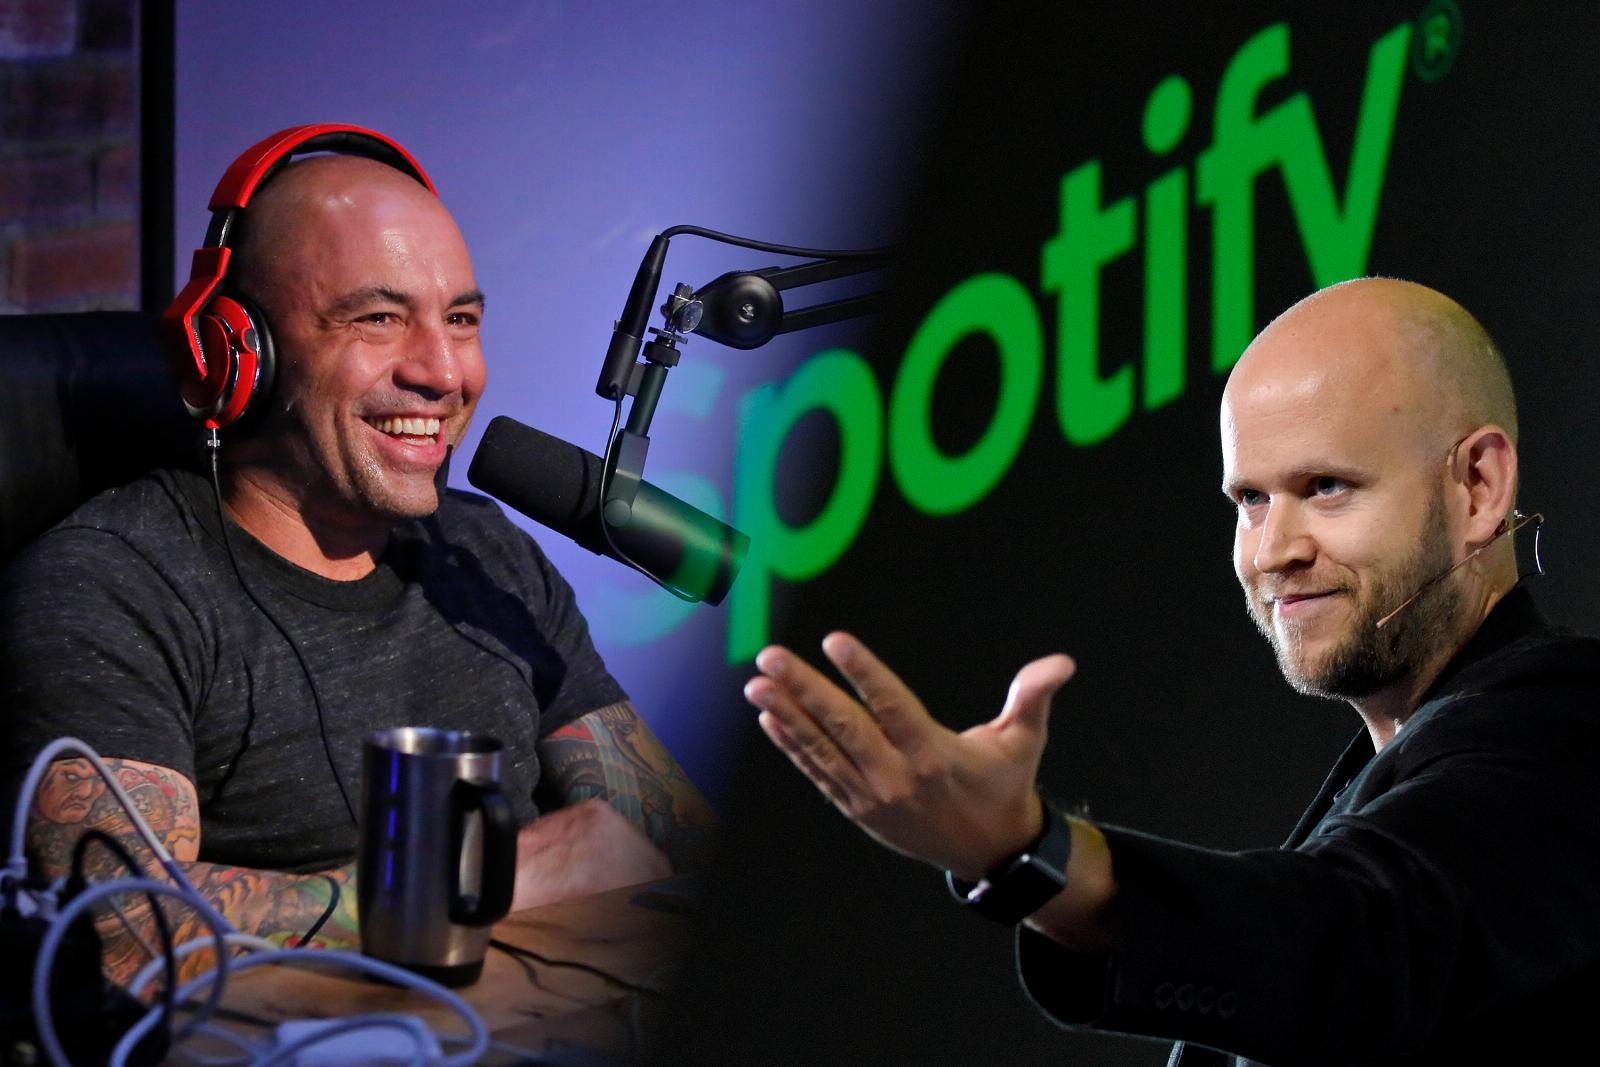 Spotify’s podcast exclusive days are over as Joe Rogan’s show expands to other platforms